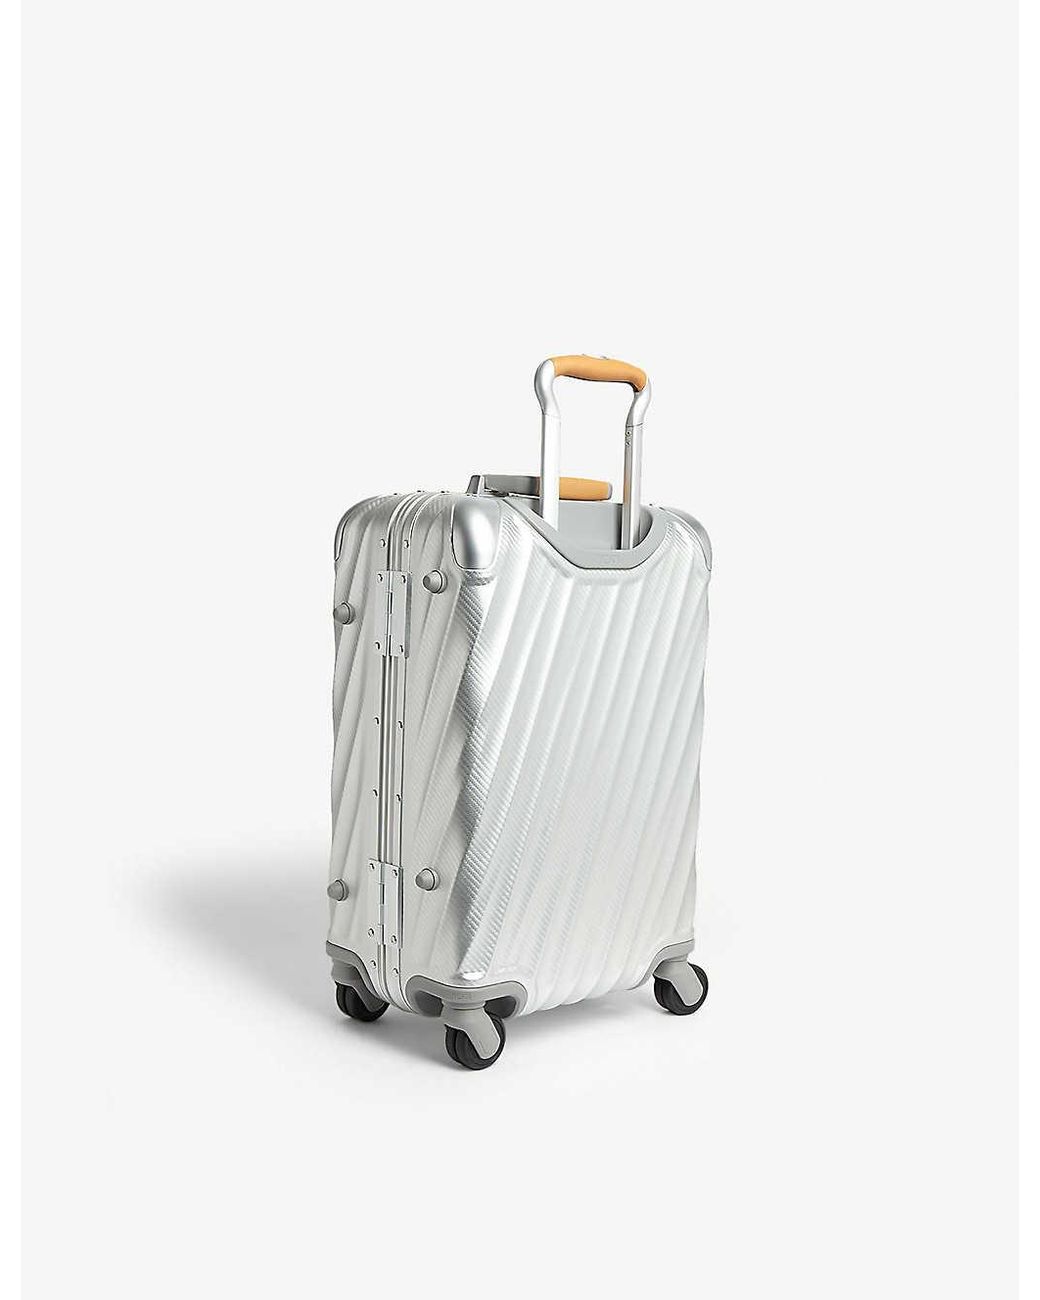 for Men Mens Bags Luggage and suitcases Tumi Synthetic 19 Degree Aluminium Worldwide Trip Packing Case in Silver Metallic Save 7% 